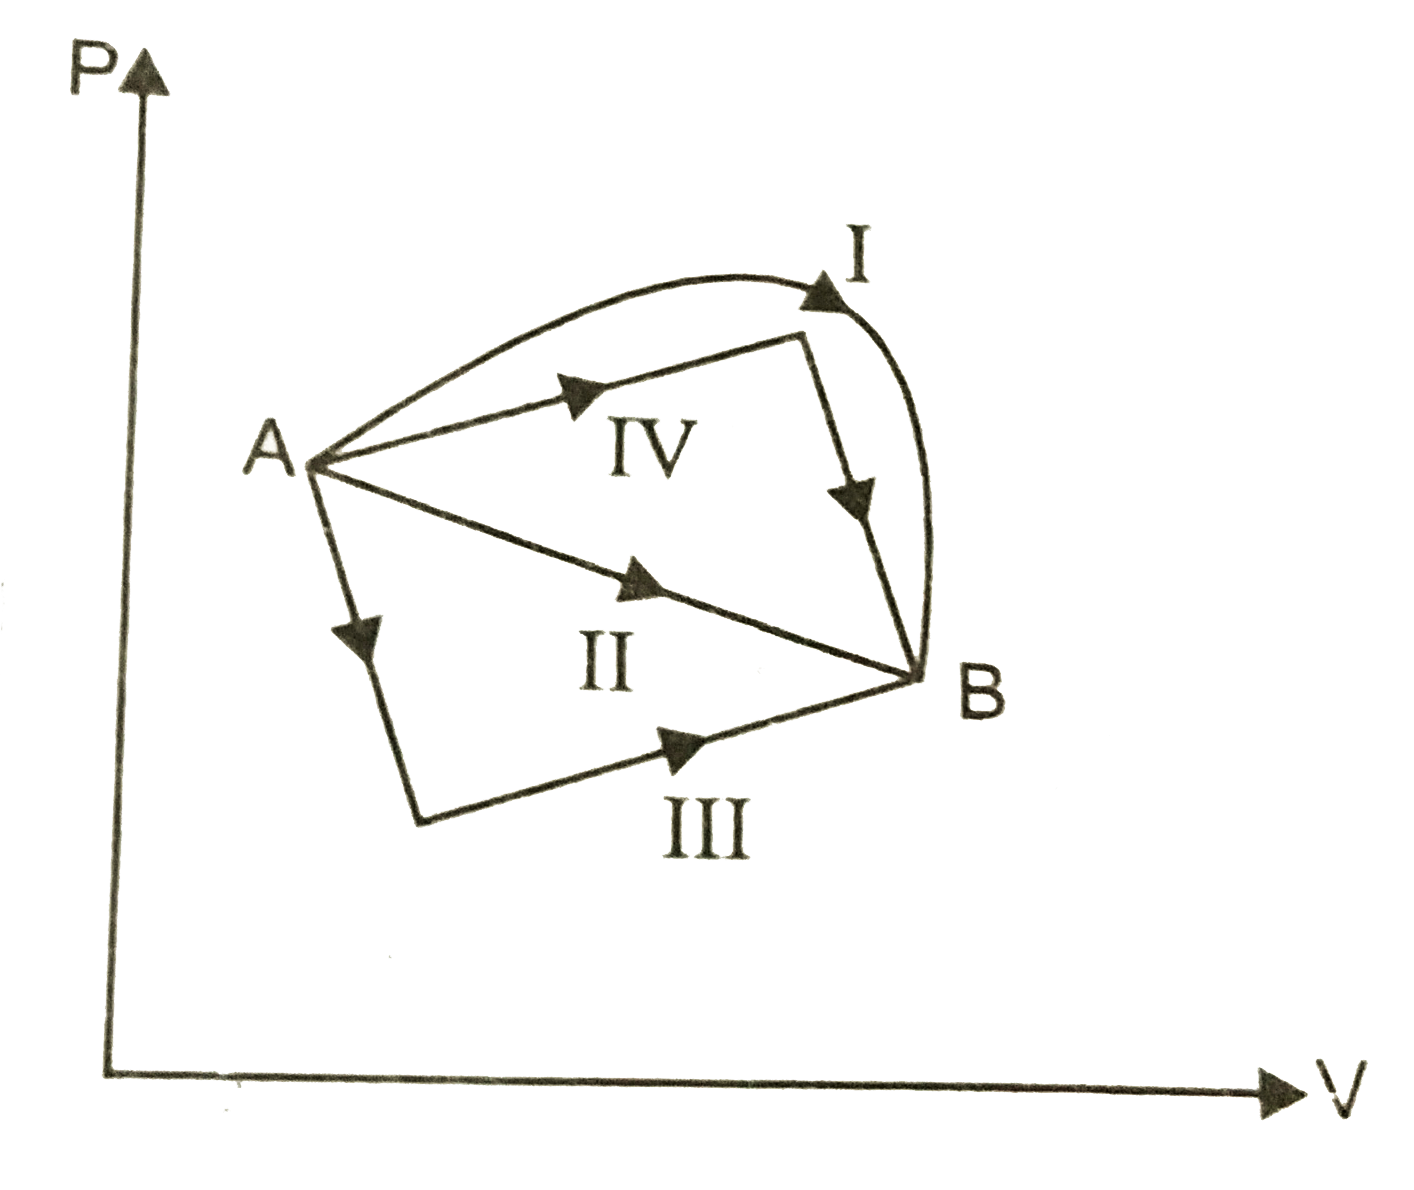 (figure). Shows the P-V diagram of an ideal gas undergoing a change of state from A to B. Four different process I, II, III, IV, as shown in (figure) may lead to the same change of state.